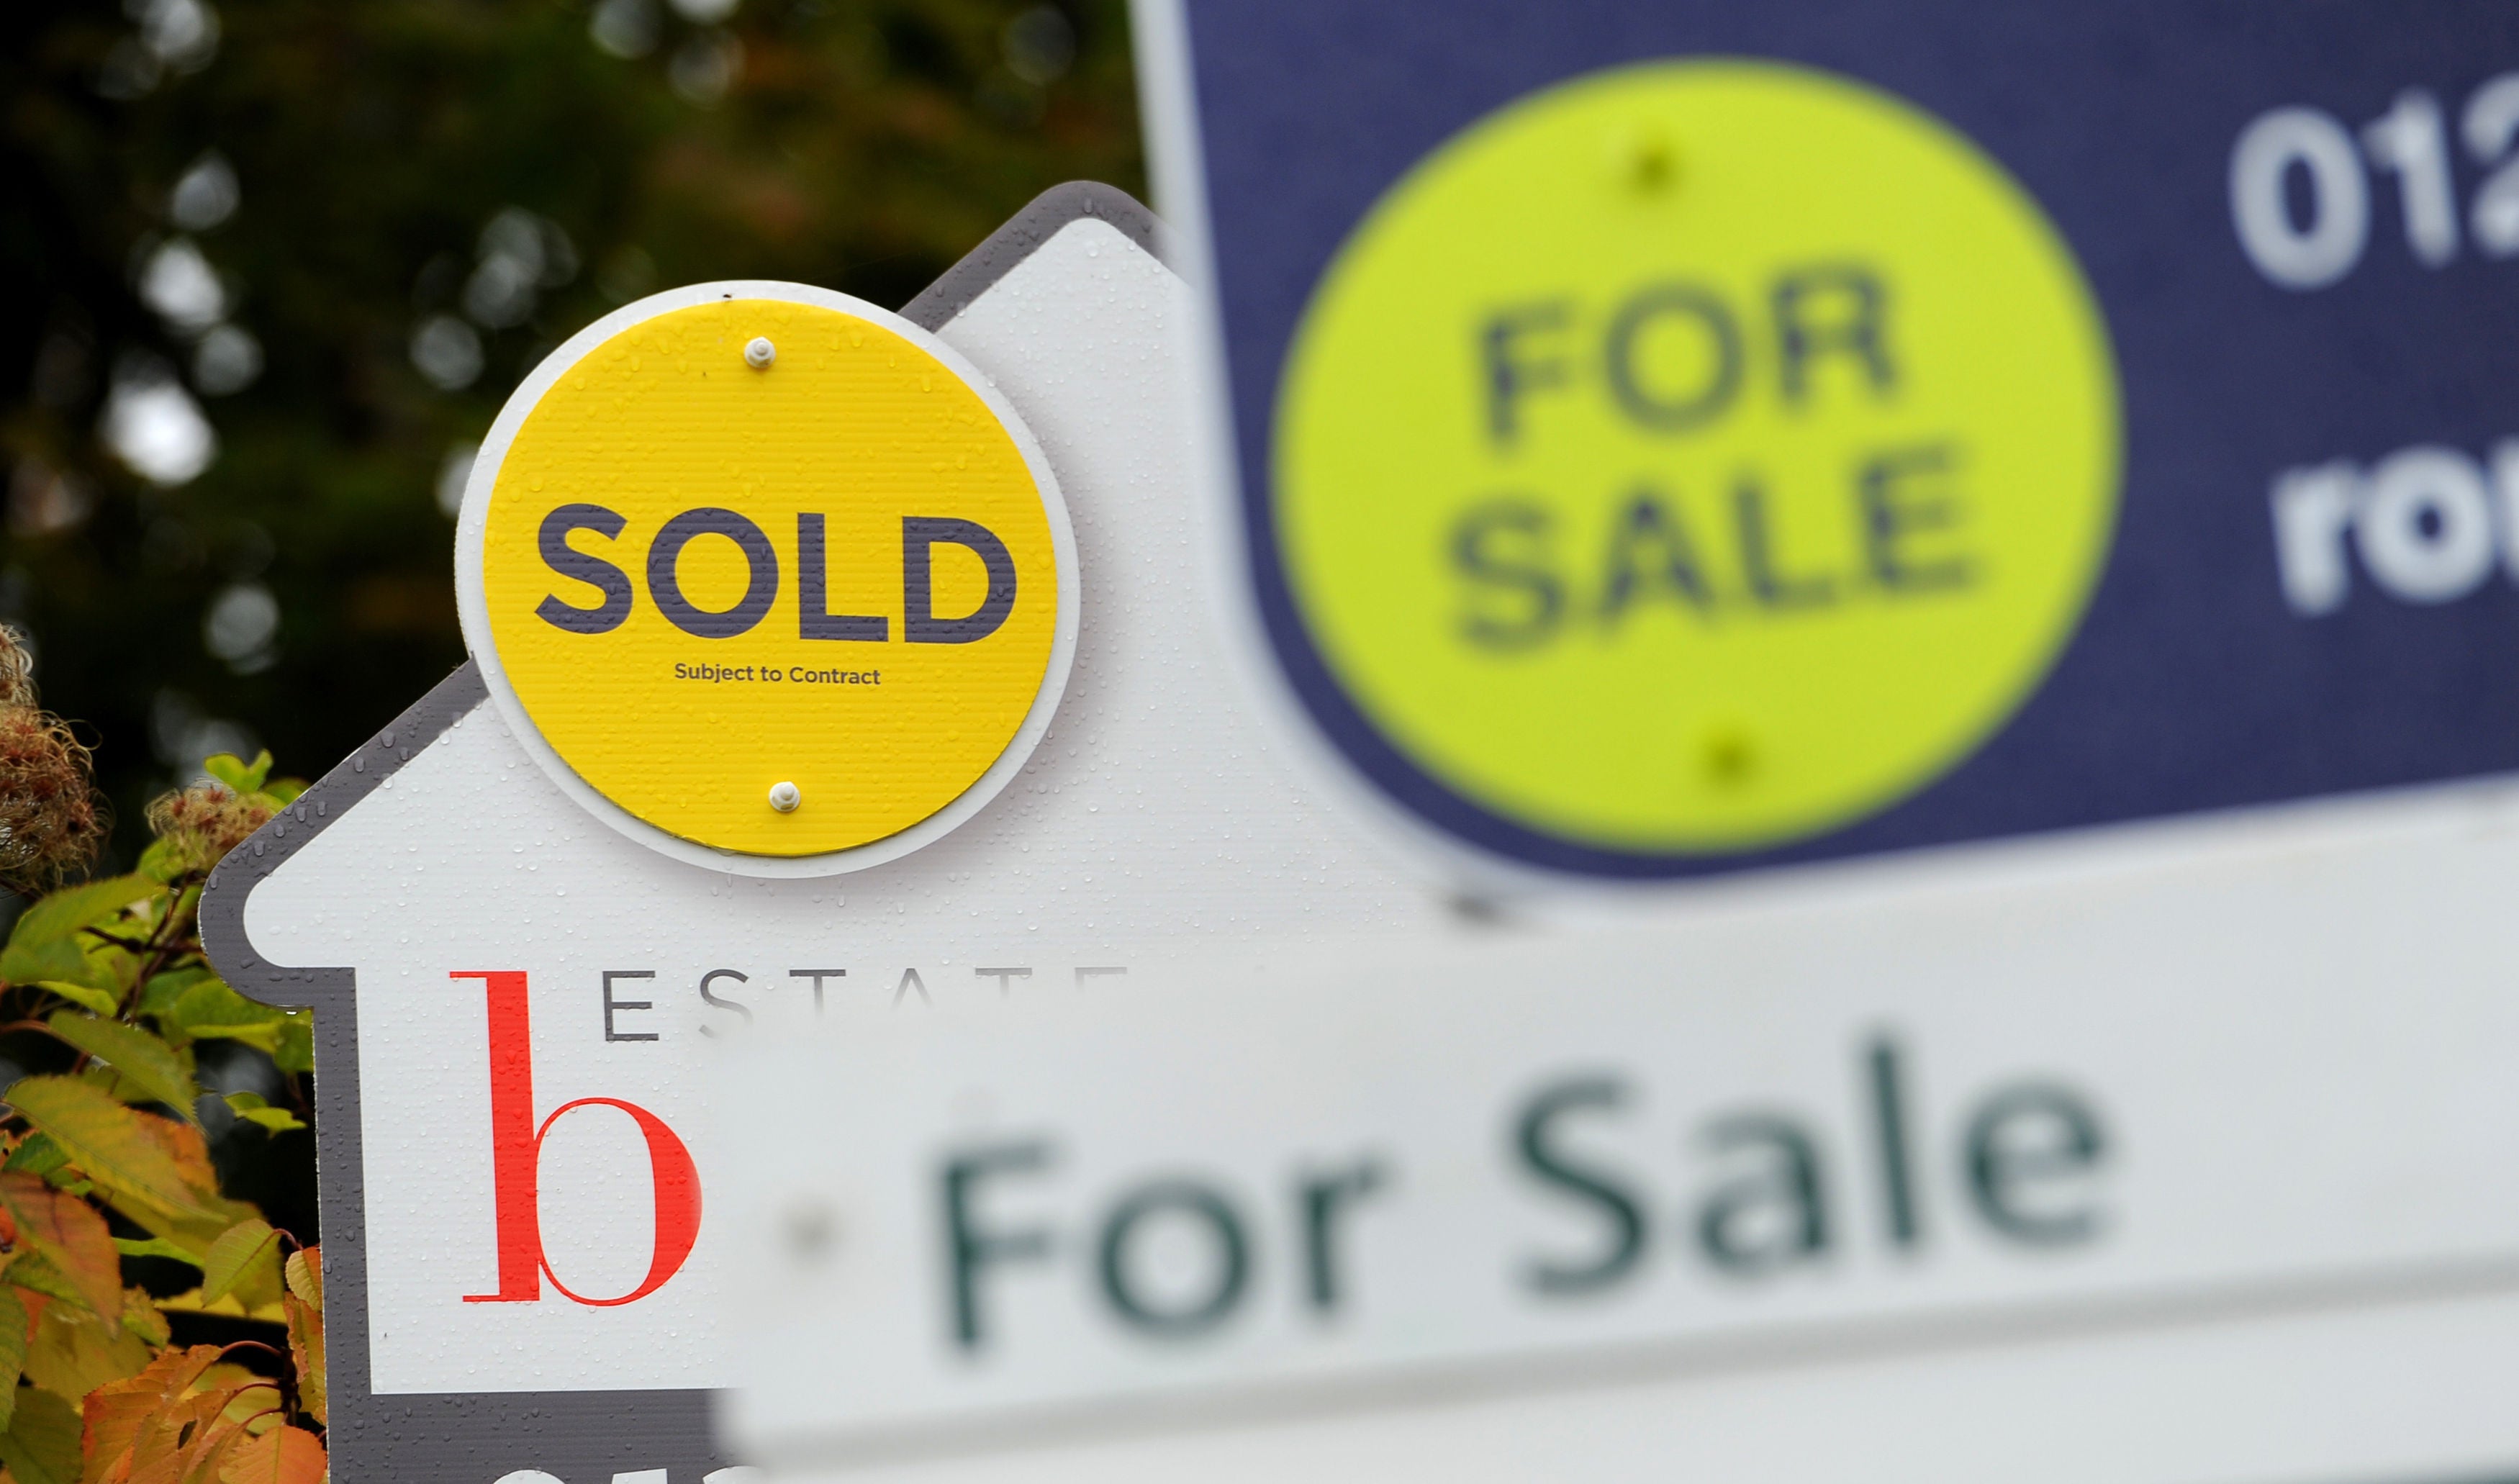 One influence on rising prices is the temporary stamp duty holiday